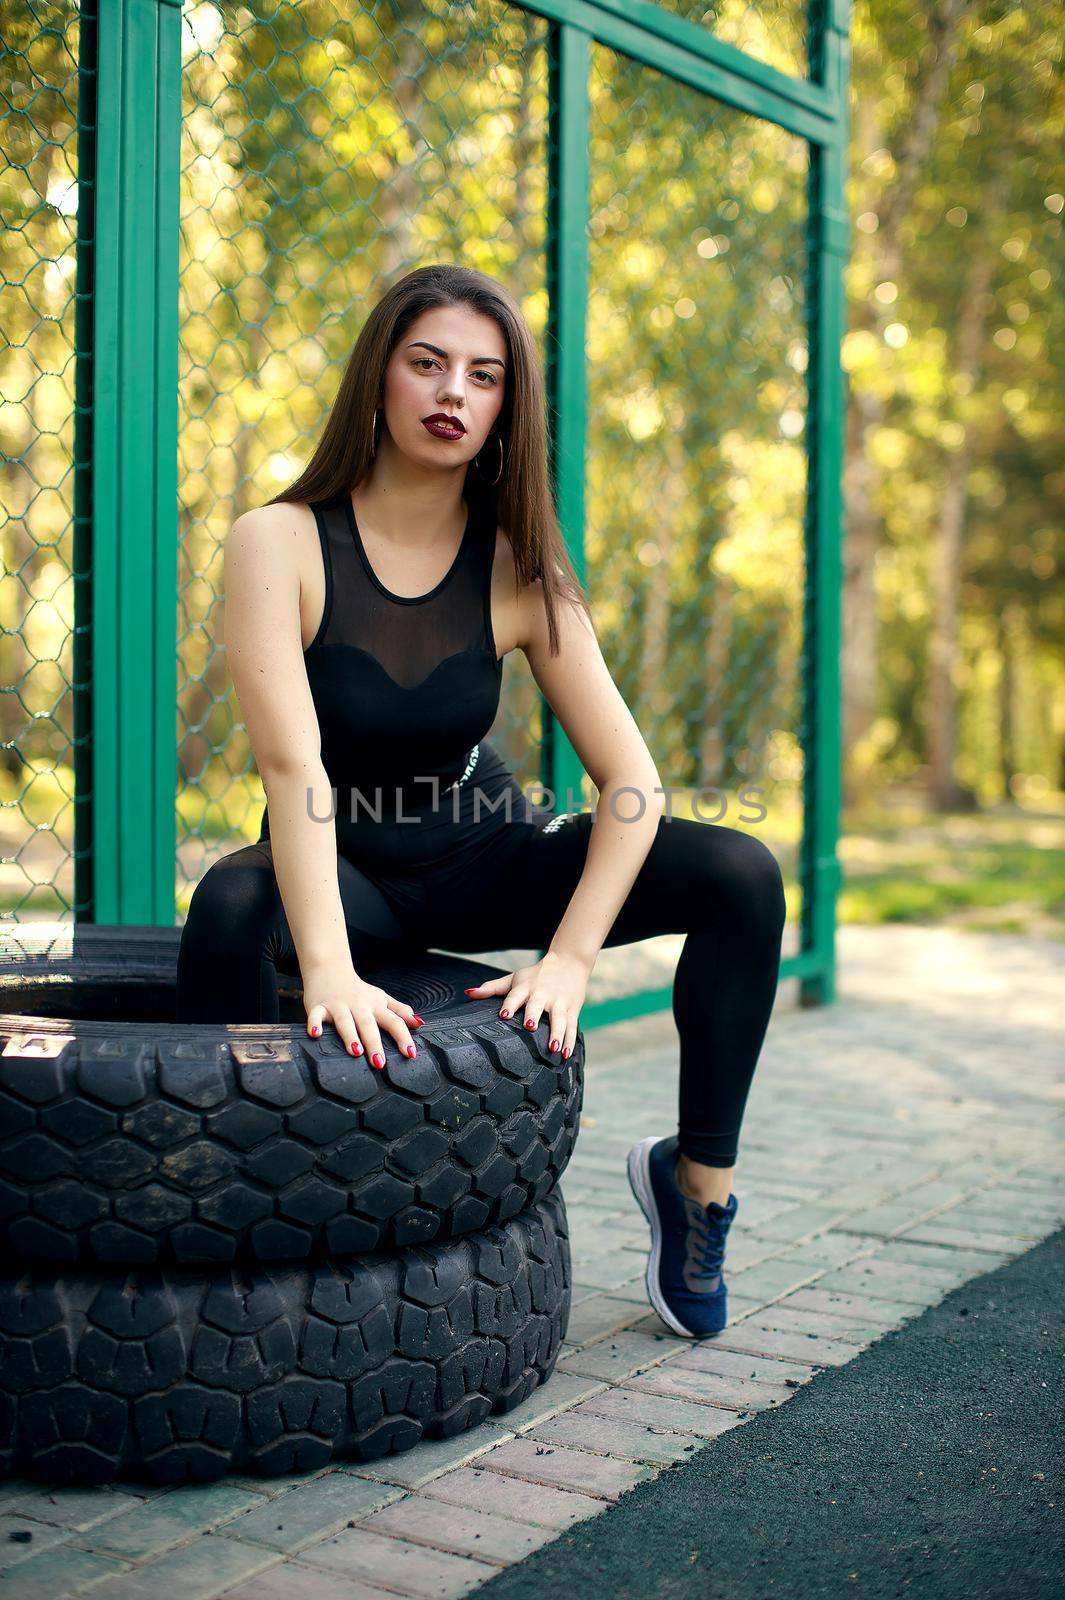 Girl training using sportground young adult woman workout posing Healthy lifestyle